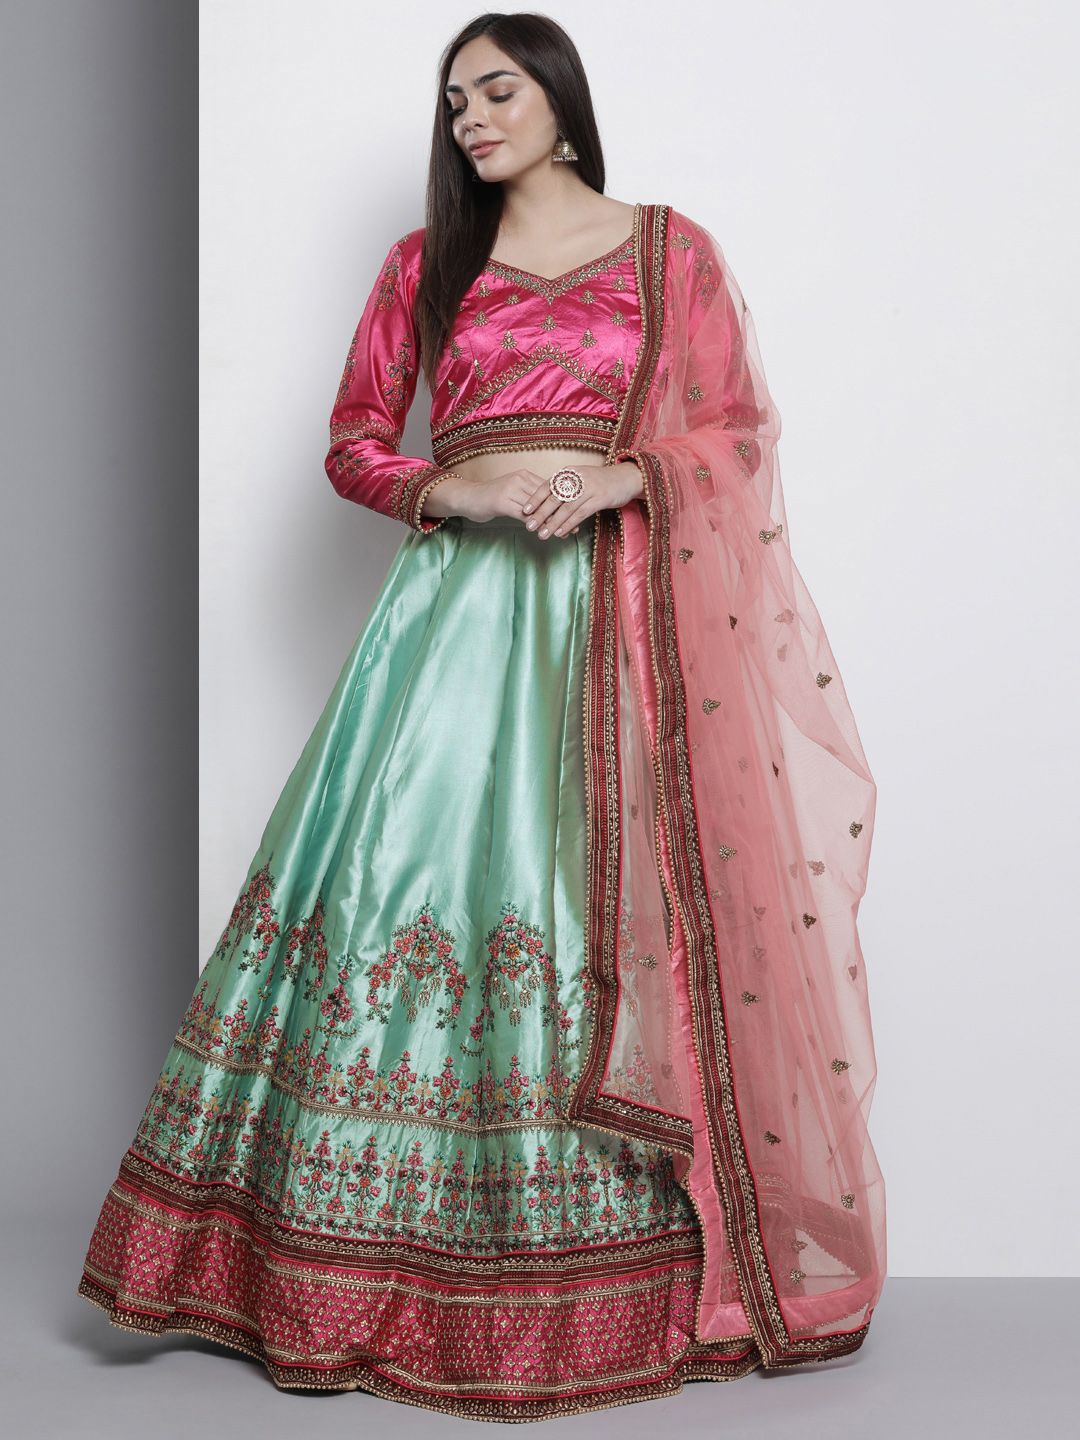 DRESSTIVE Turquoise Blue & Pink Semi-Stitched Lehenga & Unstitched Blouse with Dupatta Price in India